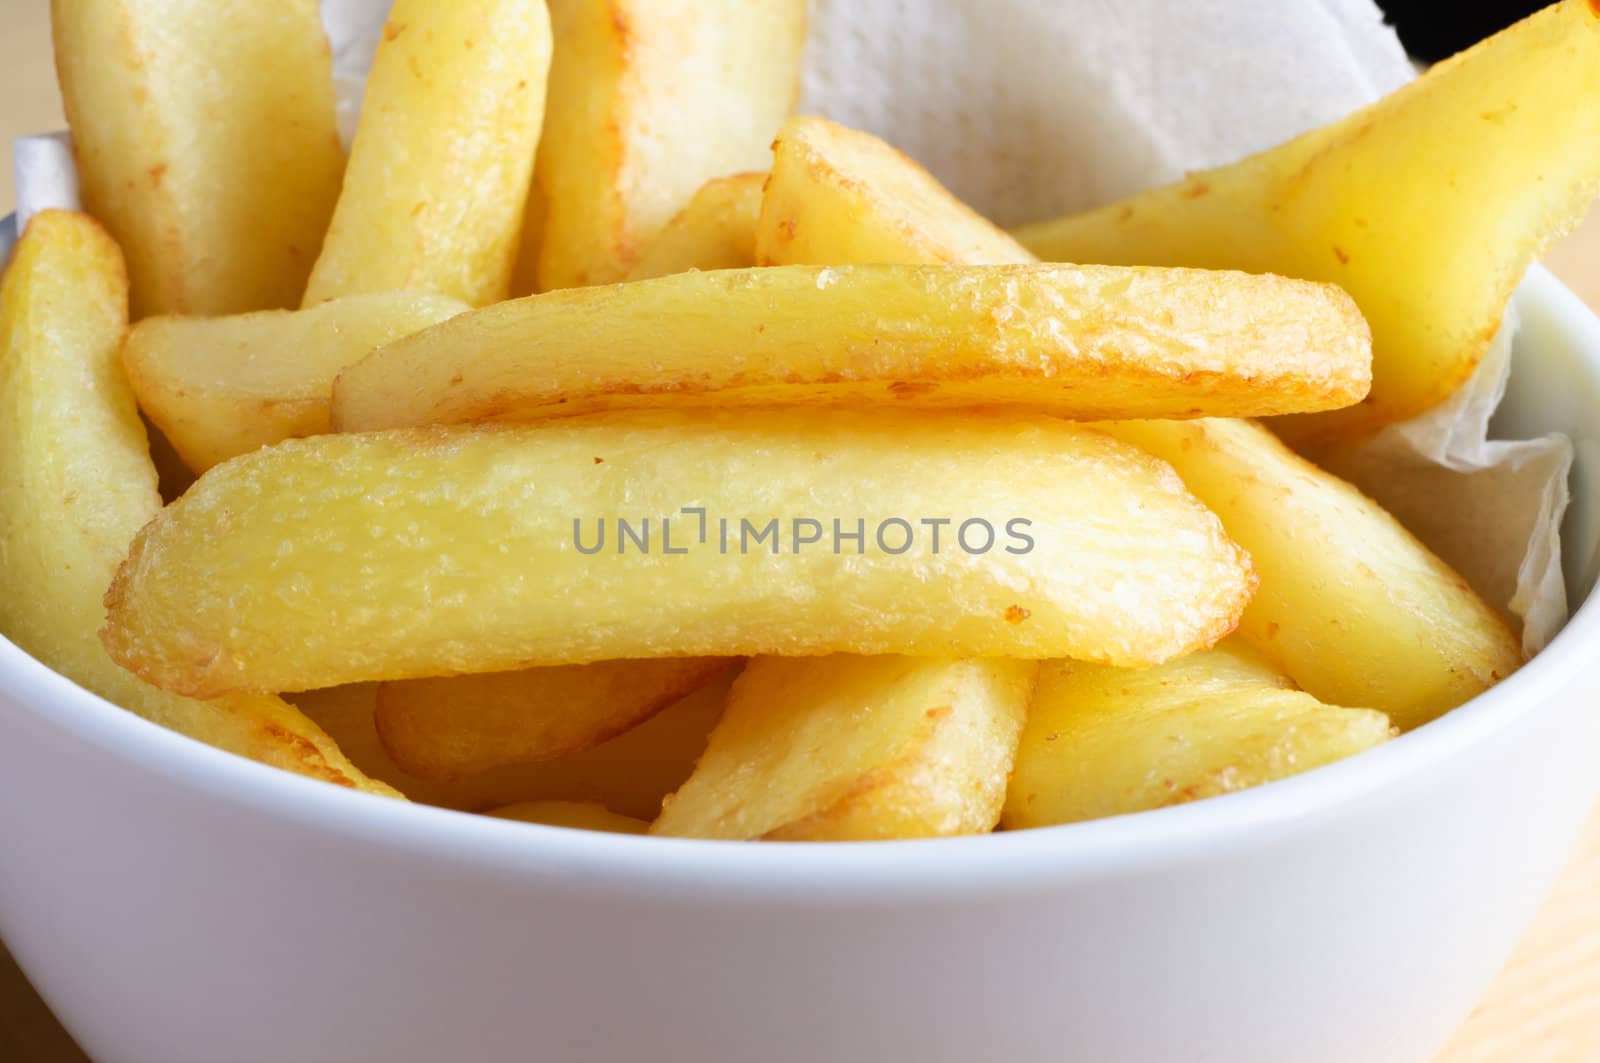 Bowl of Chips by frannyanne